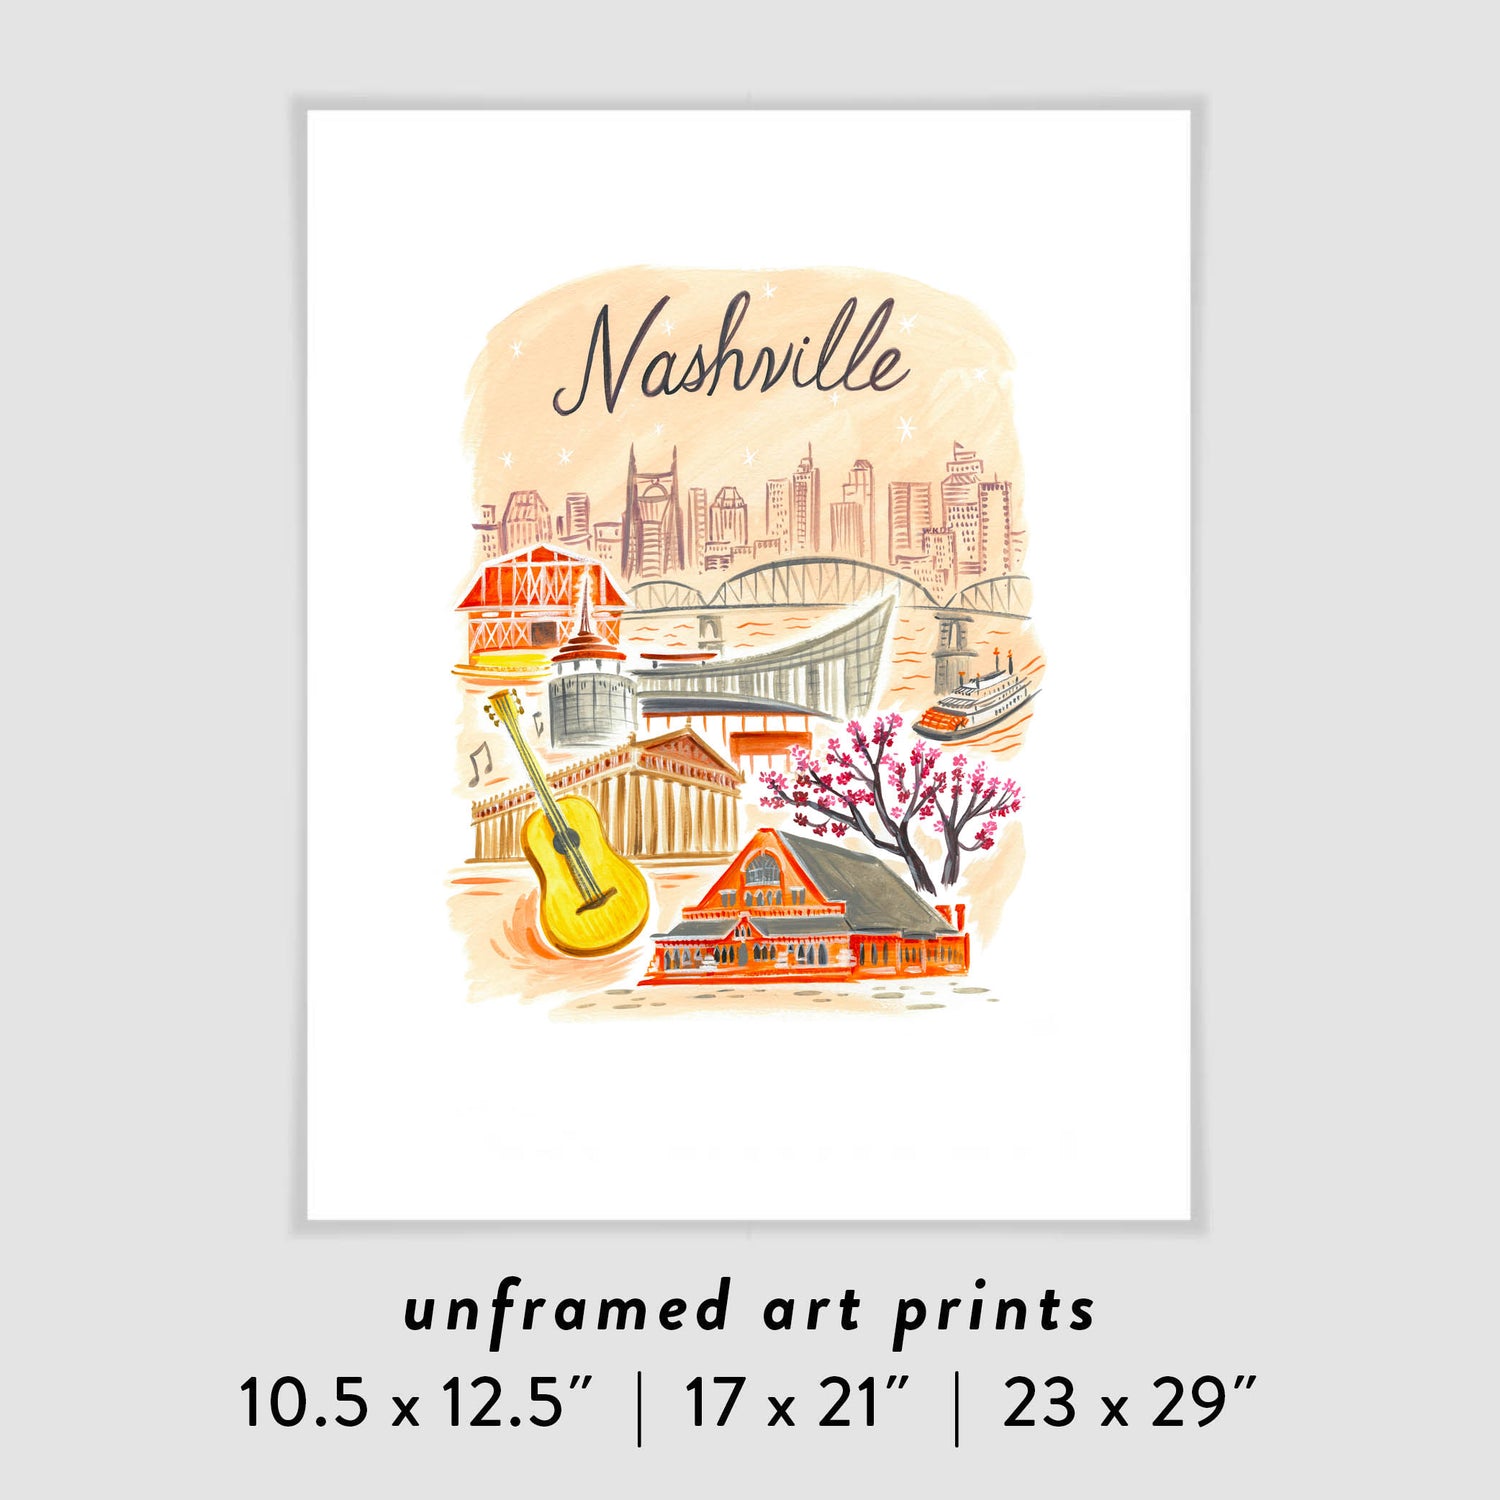 Downtown Nashville Skyline art print with famous Music City landmarks in modern colors; illustration by Angela Staehling